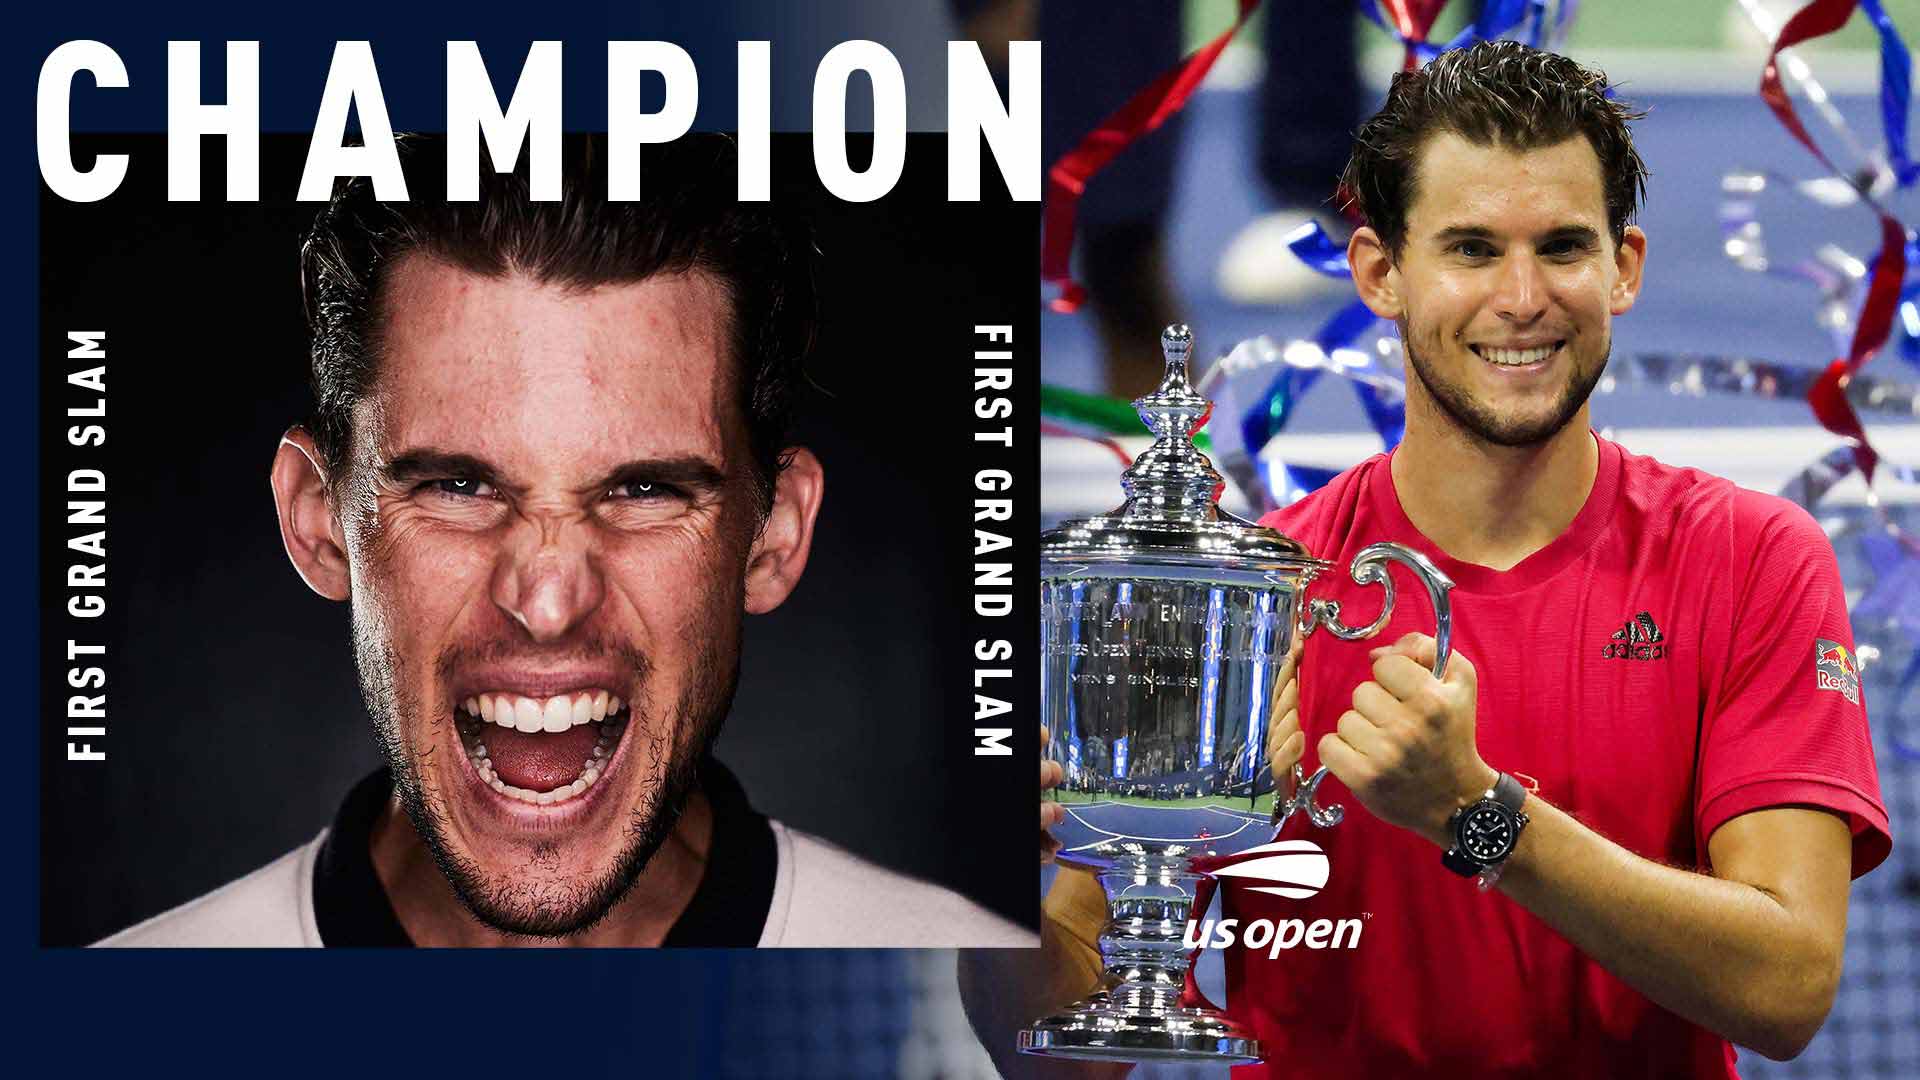 Dominic Thiem defeats Alexander Zverev in a five-set US Open final to clinch his first Grand Slam title.